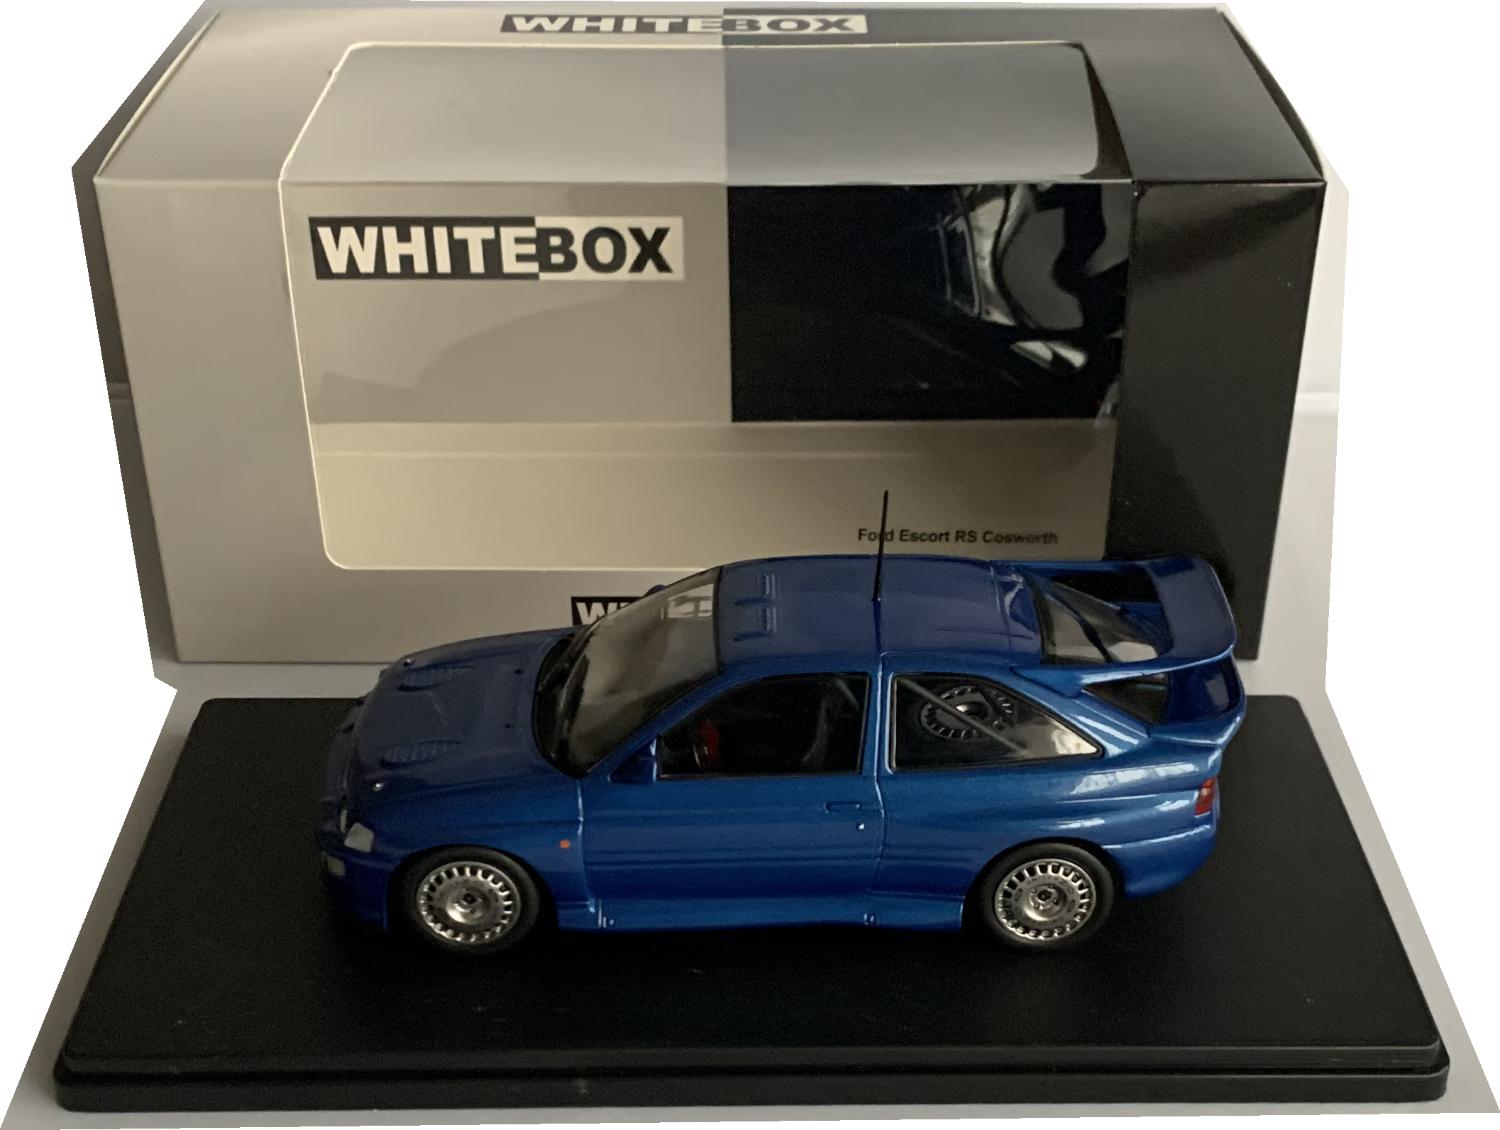 An excellent reproduction of the Ford Escort RS Cosworth with high level of detail throughout, all authentically recreated. The model is presented in a window display box, the car is approx. 17 cm long and the presentation box is 25 cm long